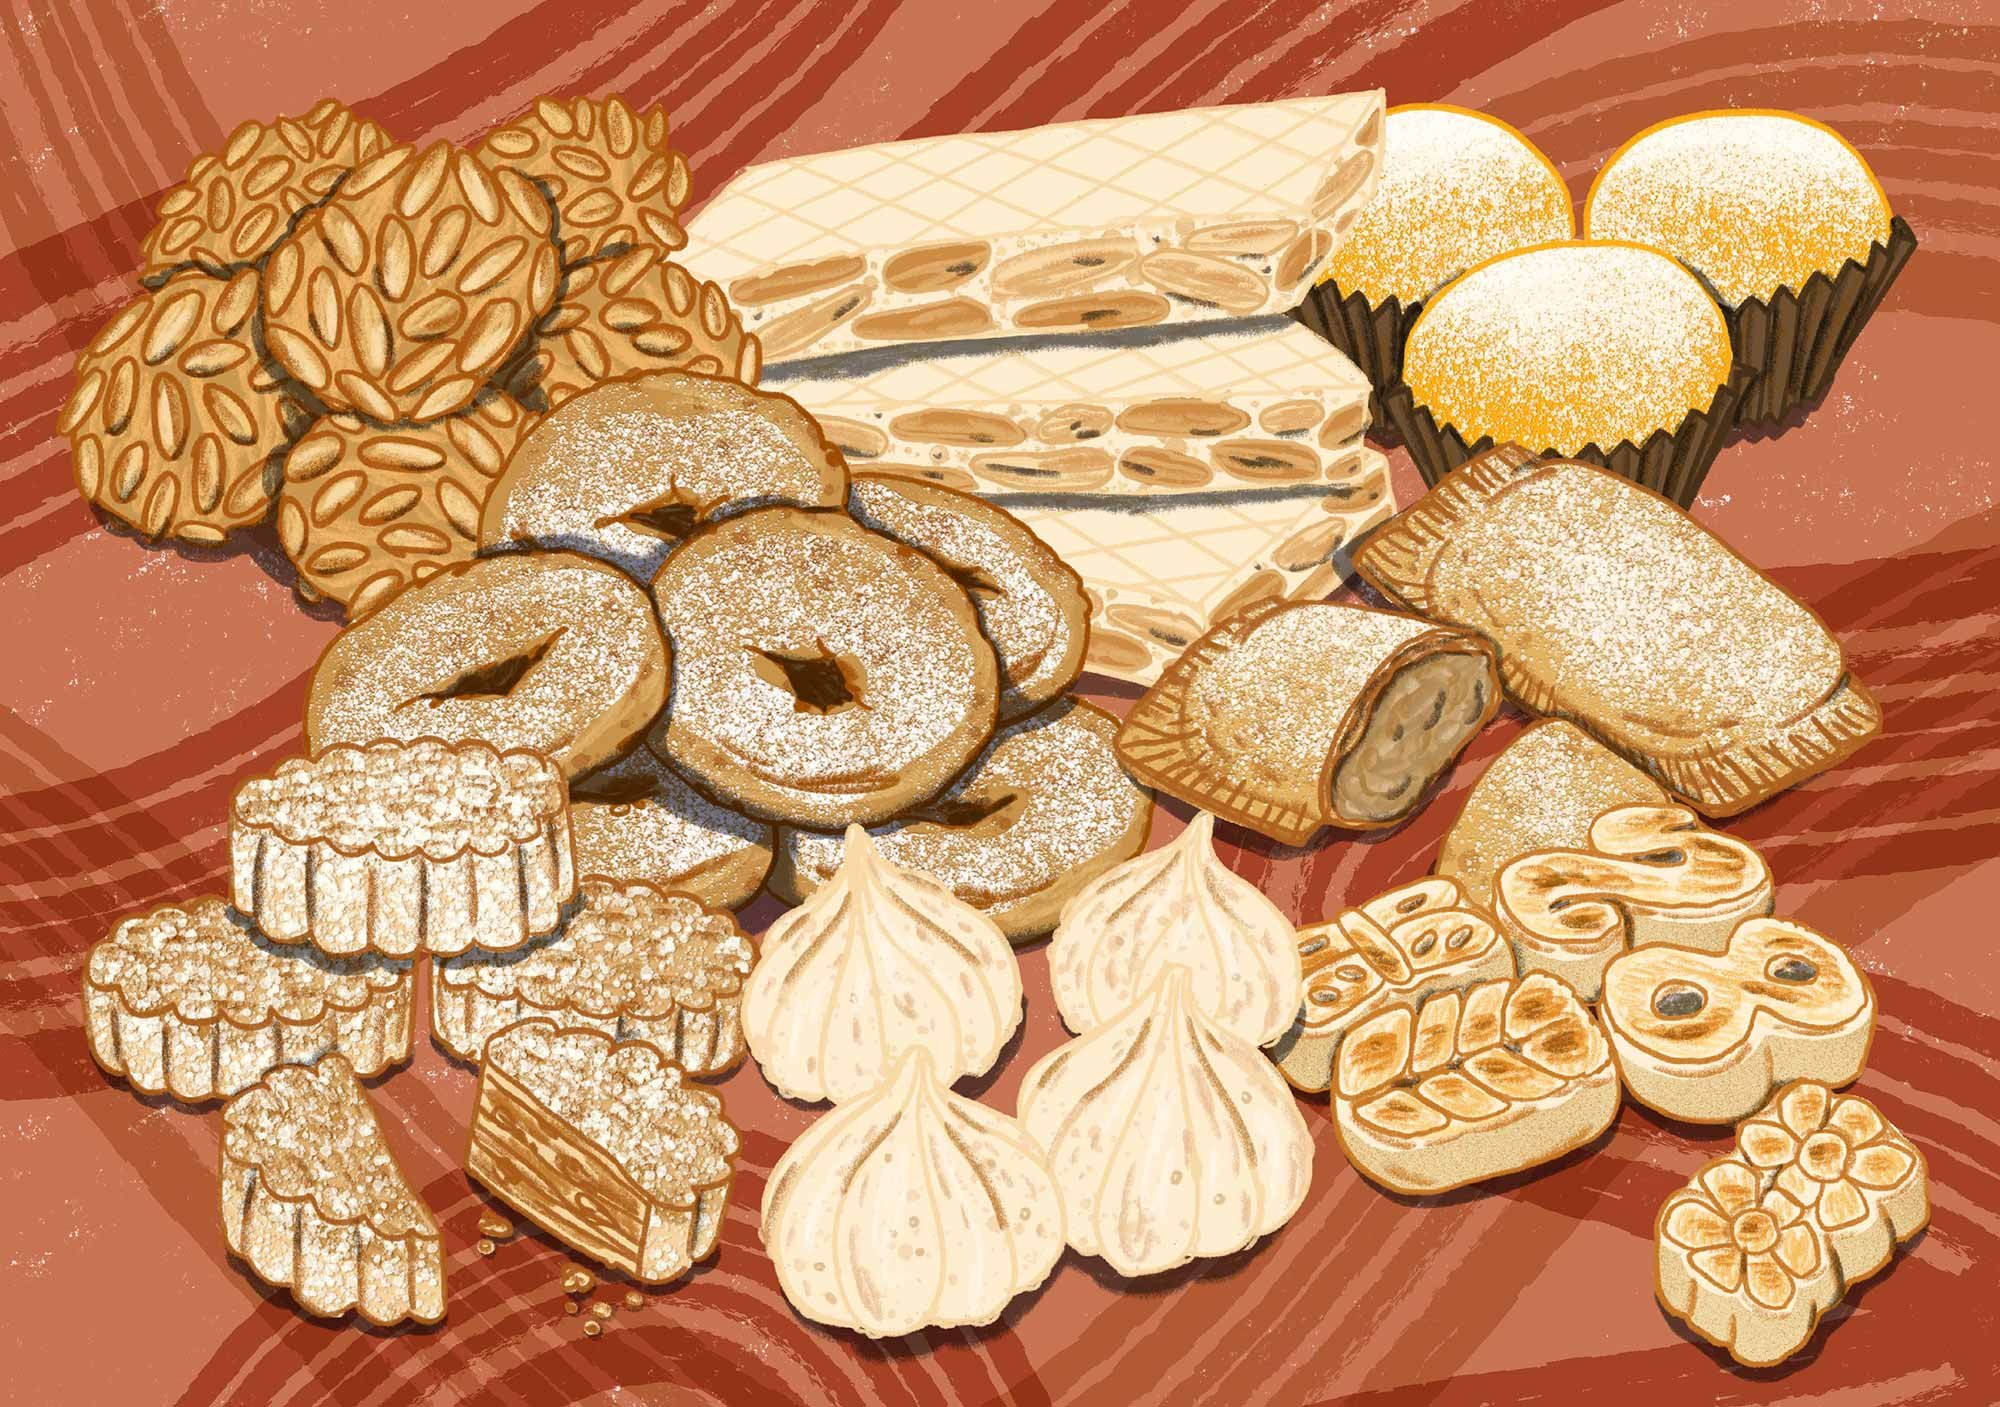 A Field Guide to Spain’s Great Cookies